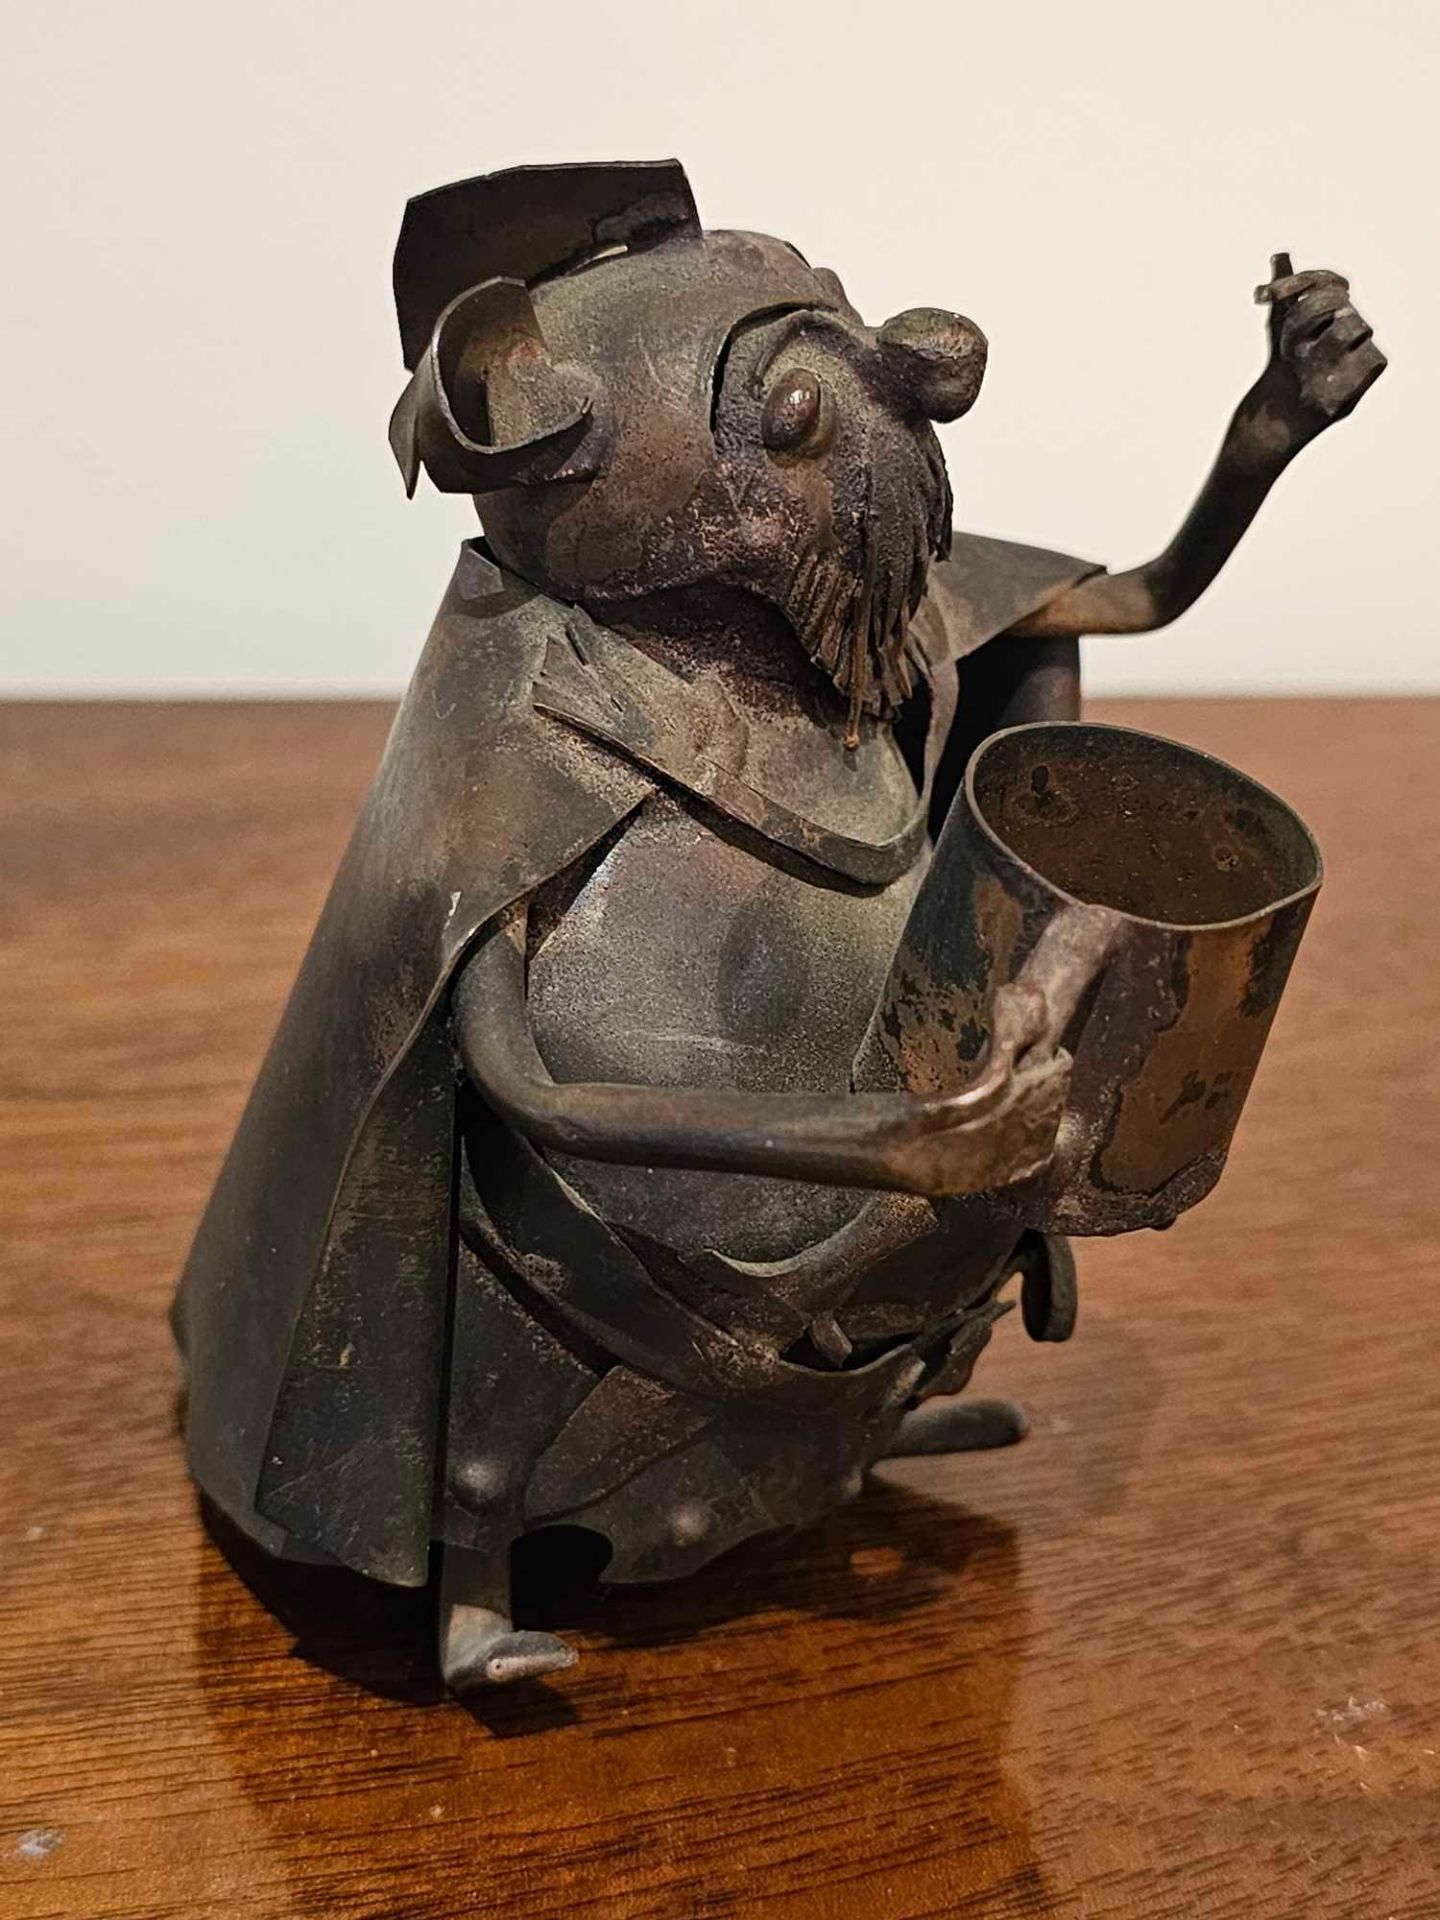 A Tin Metal Sculpture Of A Mouse Wearing A Cape And Holding A Tankard - Image 3 of 4